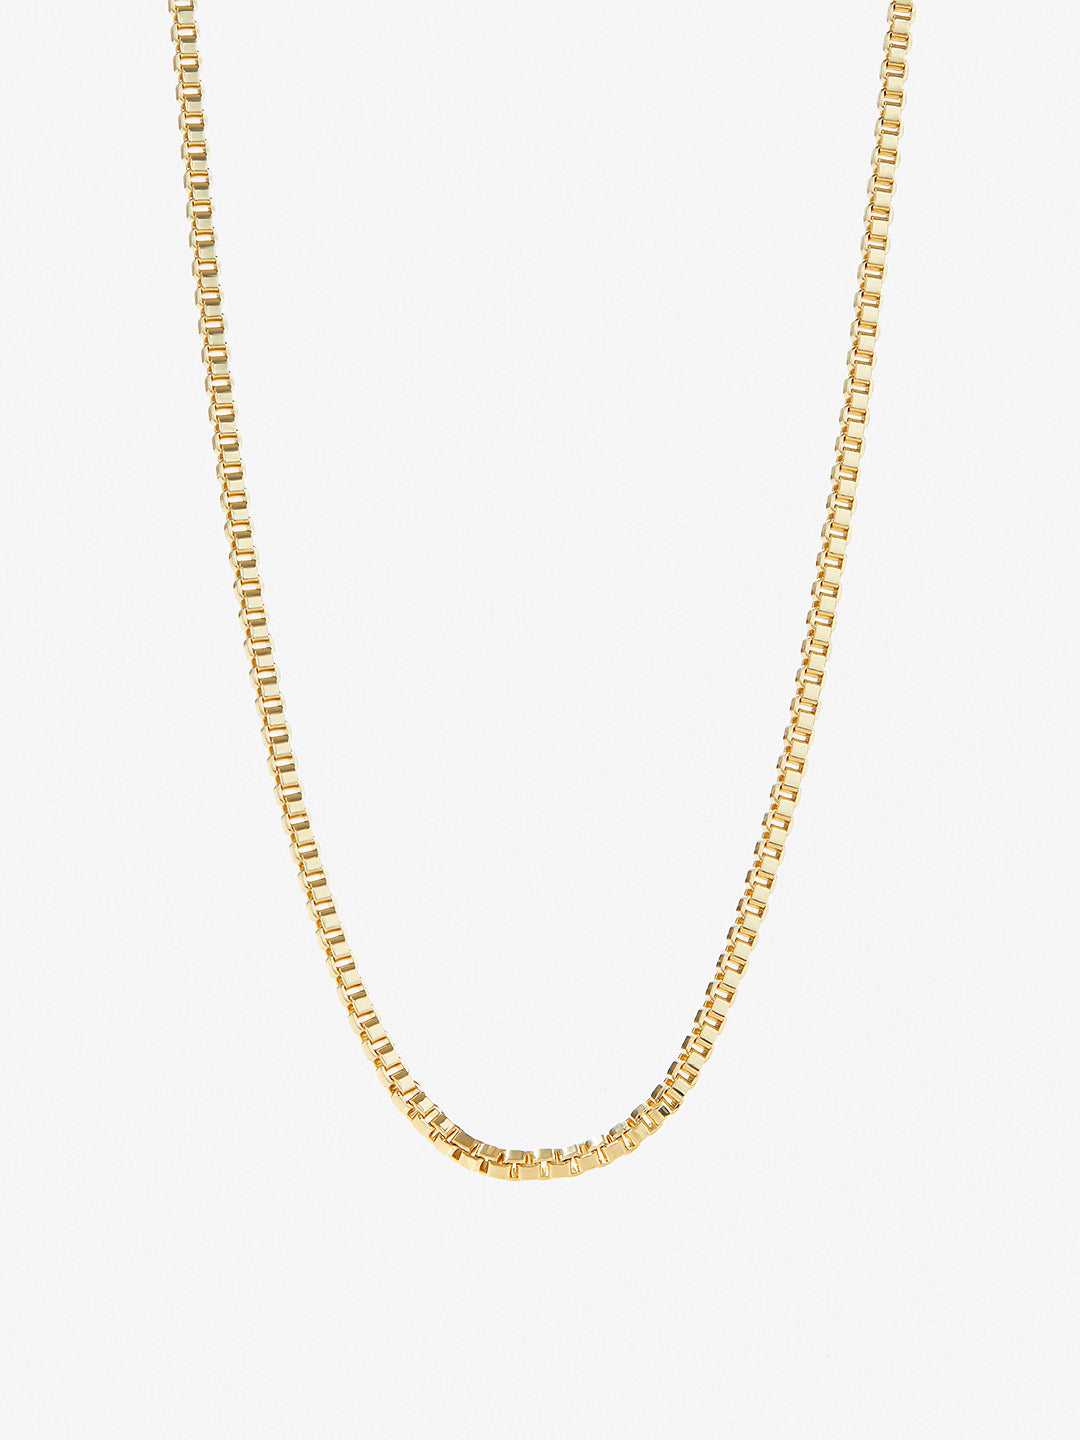 Chain Necklaces | Ana Luisa Jewelry